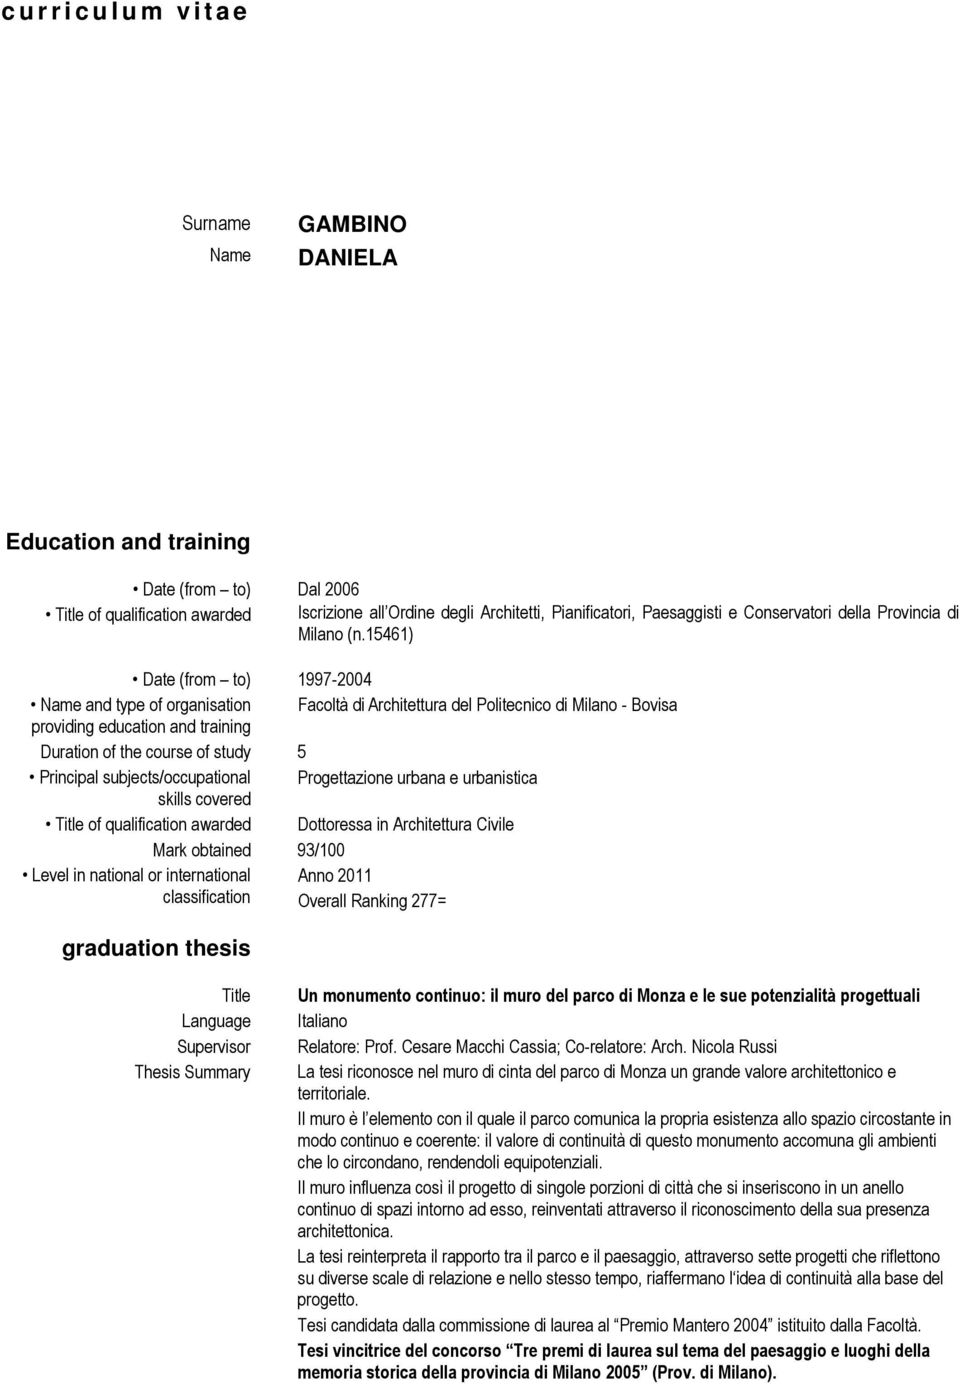 15461) Date (from to) 1997-2004 Name and type of organisation Facoltà di Architettura del Politecnico di Milano - Bovisa providing education and training Duration of the course of study 5 Principal